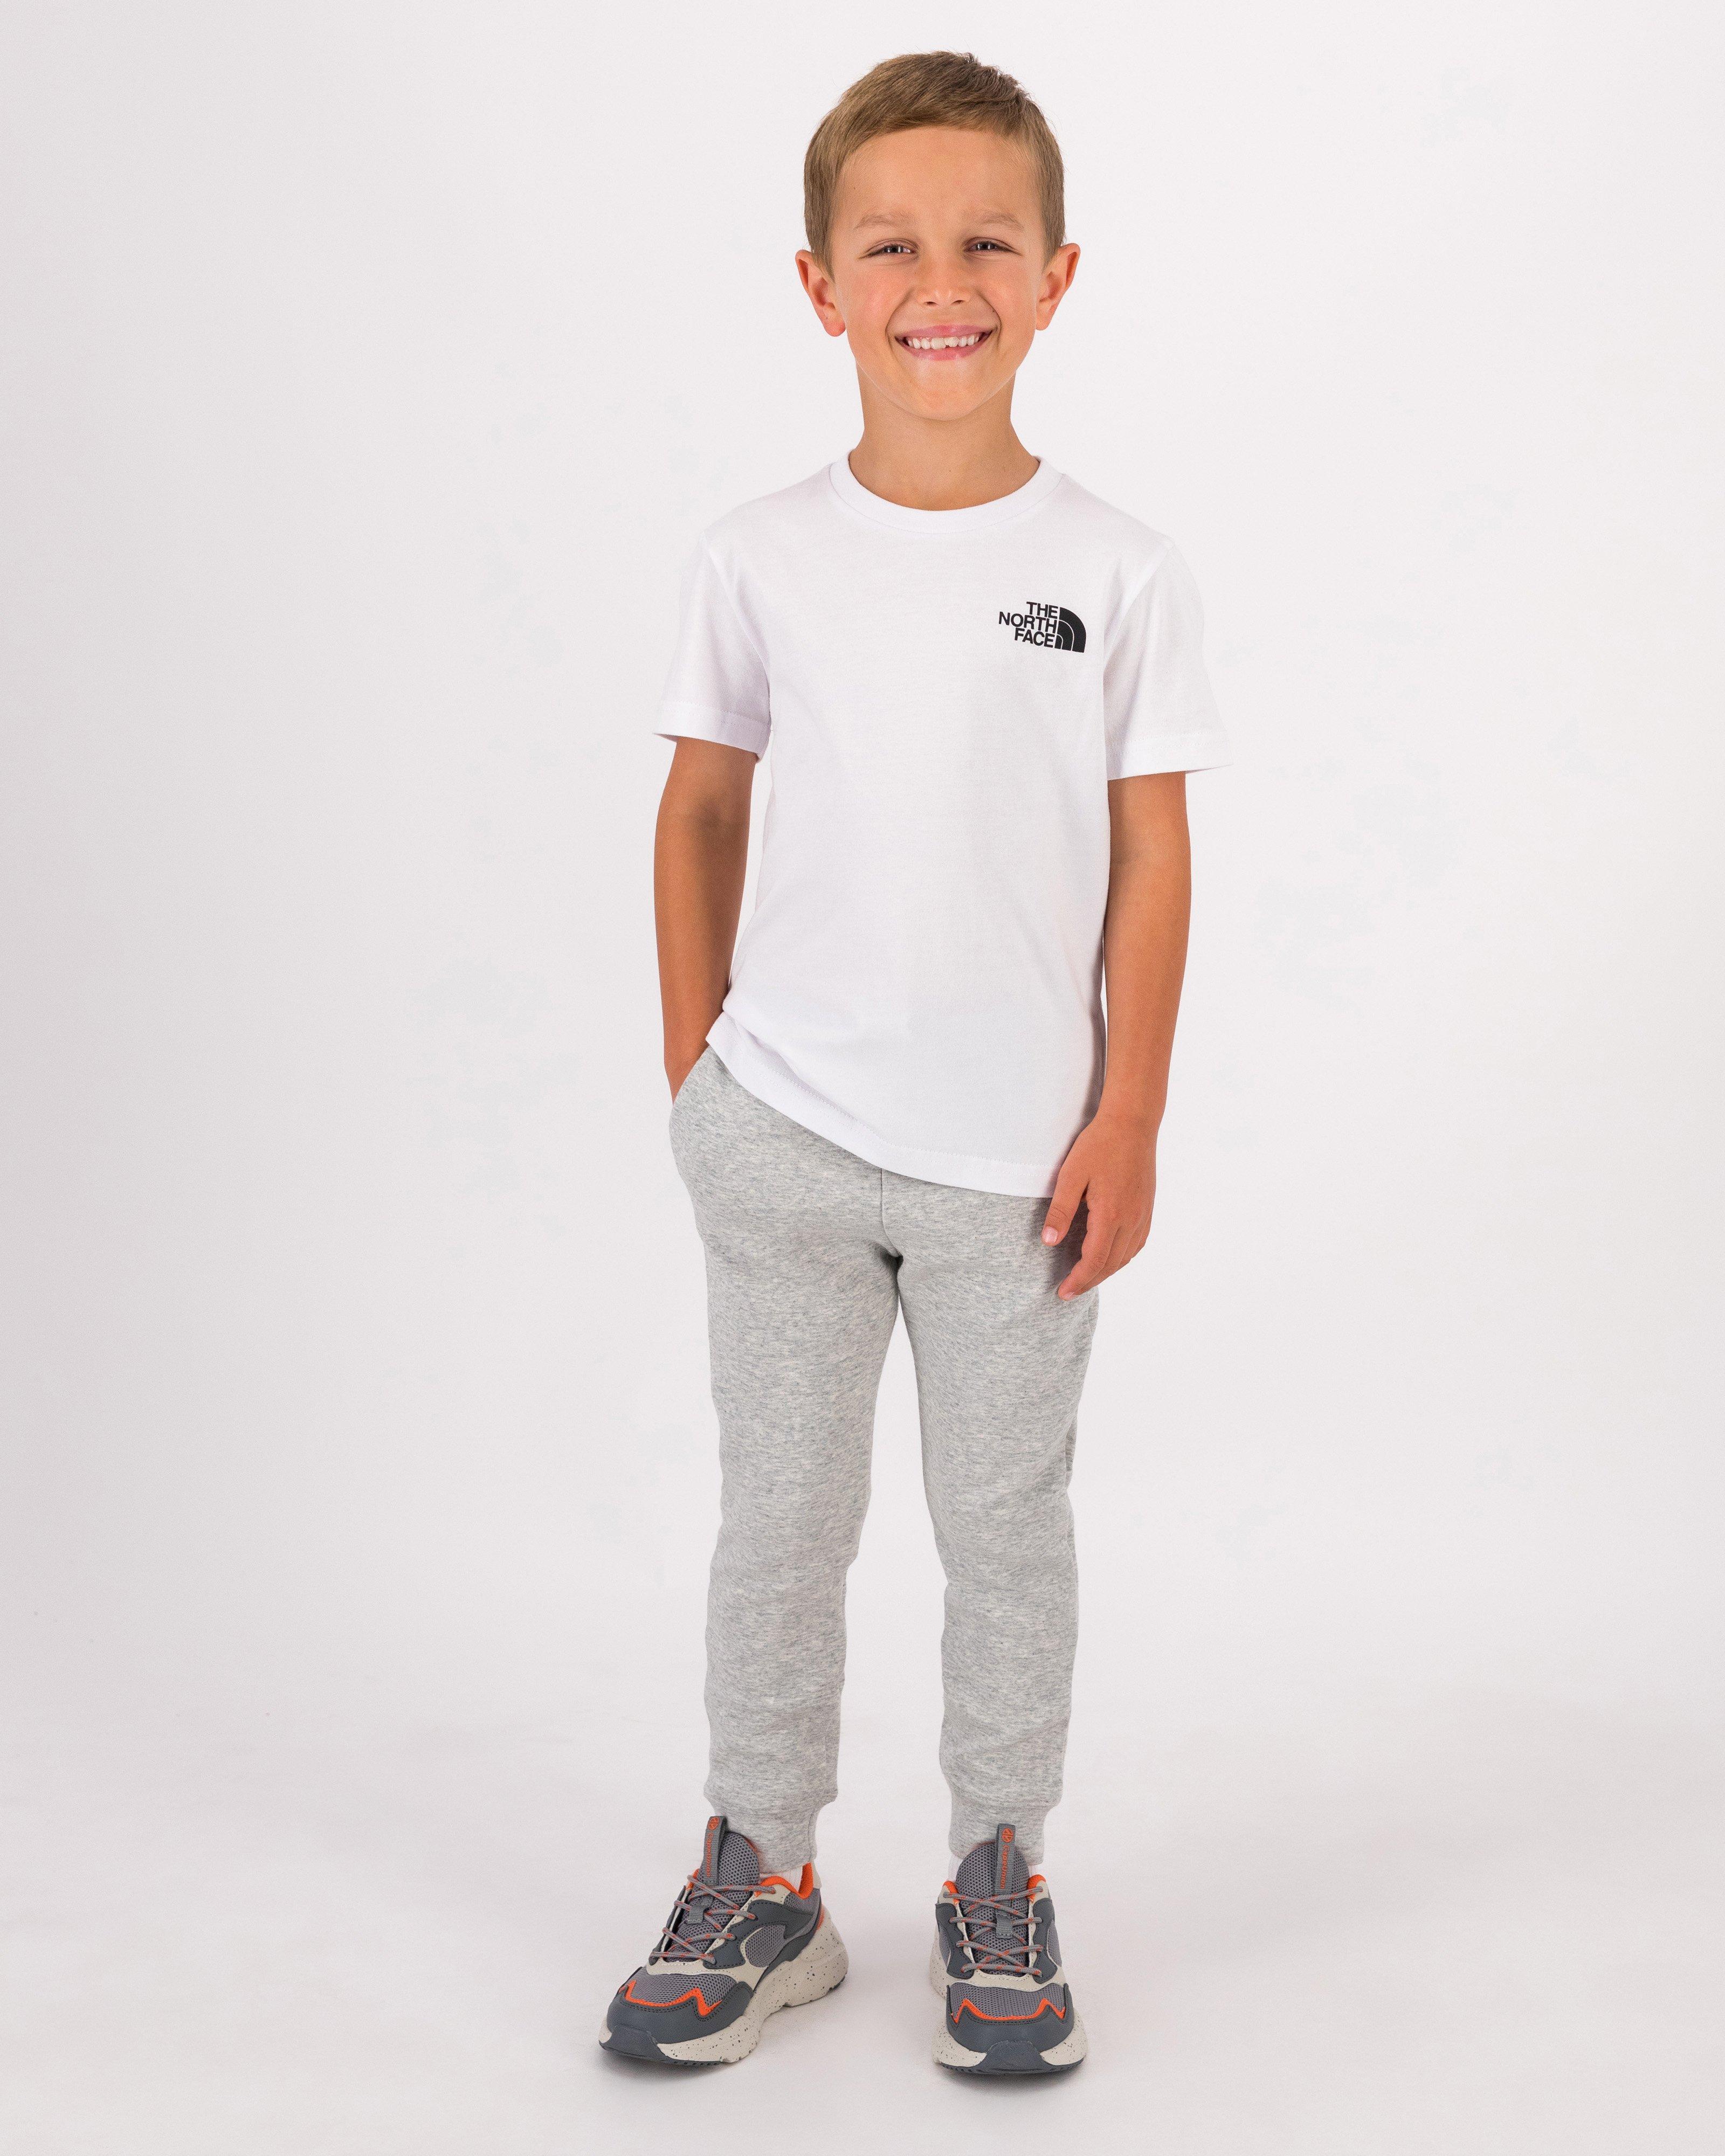 The North Face Youth Boys’ Simple Dome Cotton T-shirt -  White